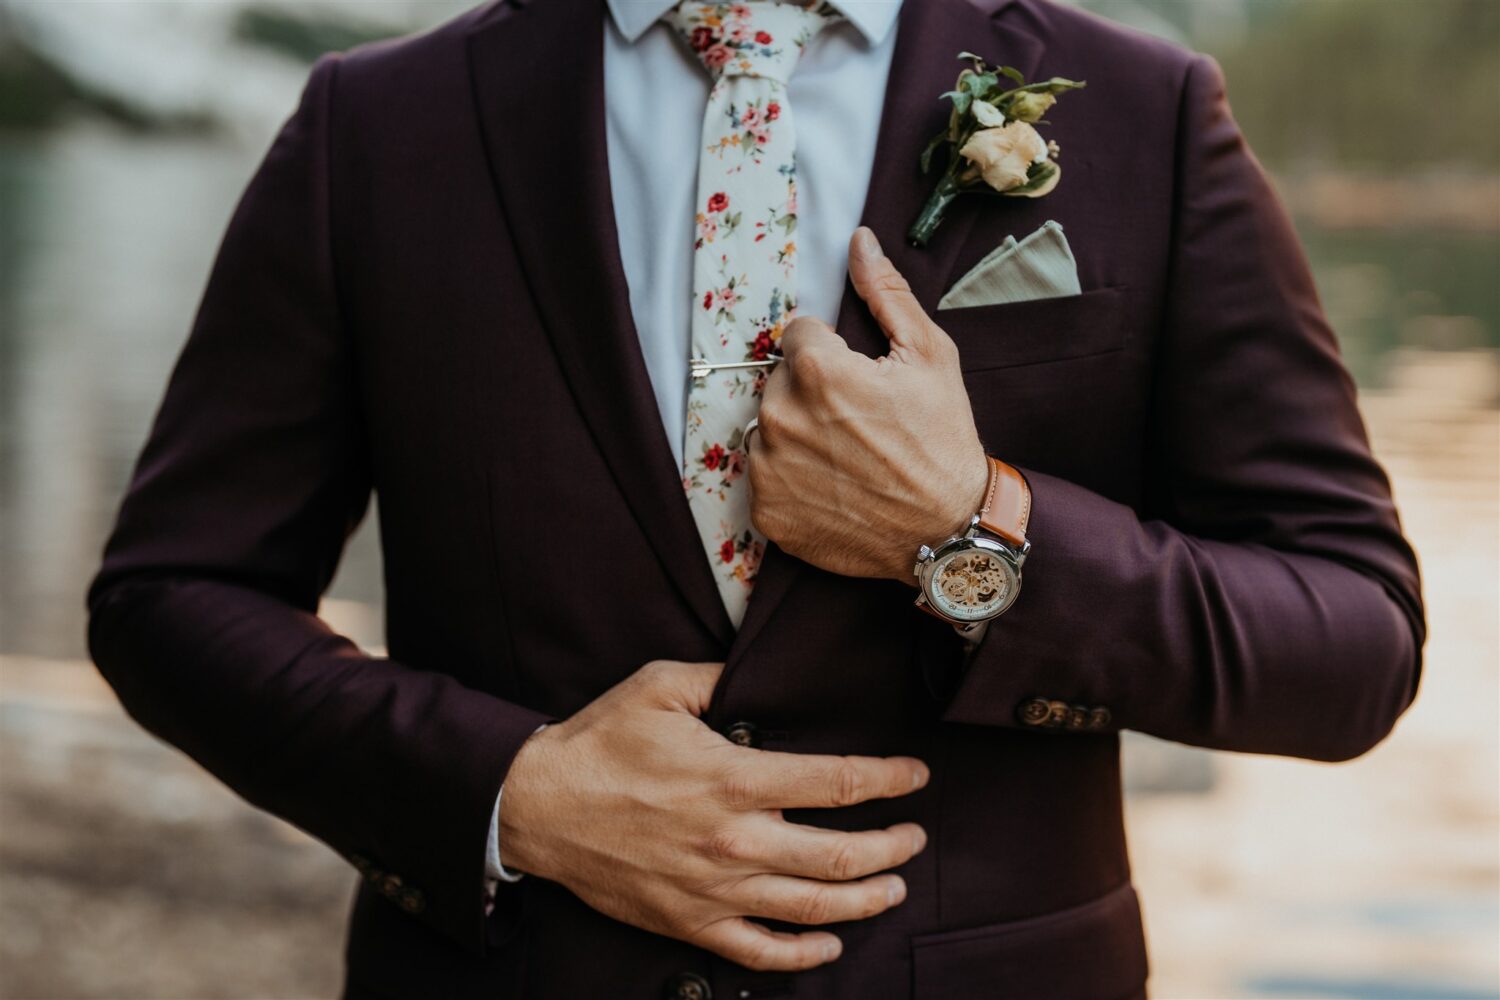 groom holds suit jacket wearing watch and flower tie